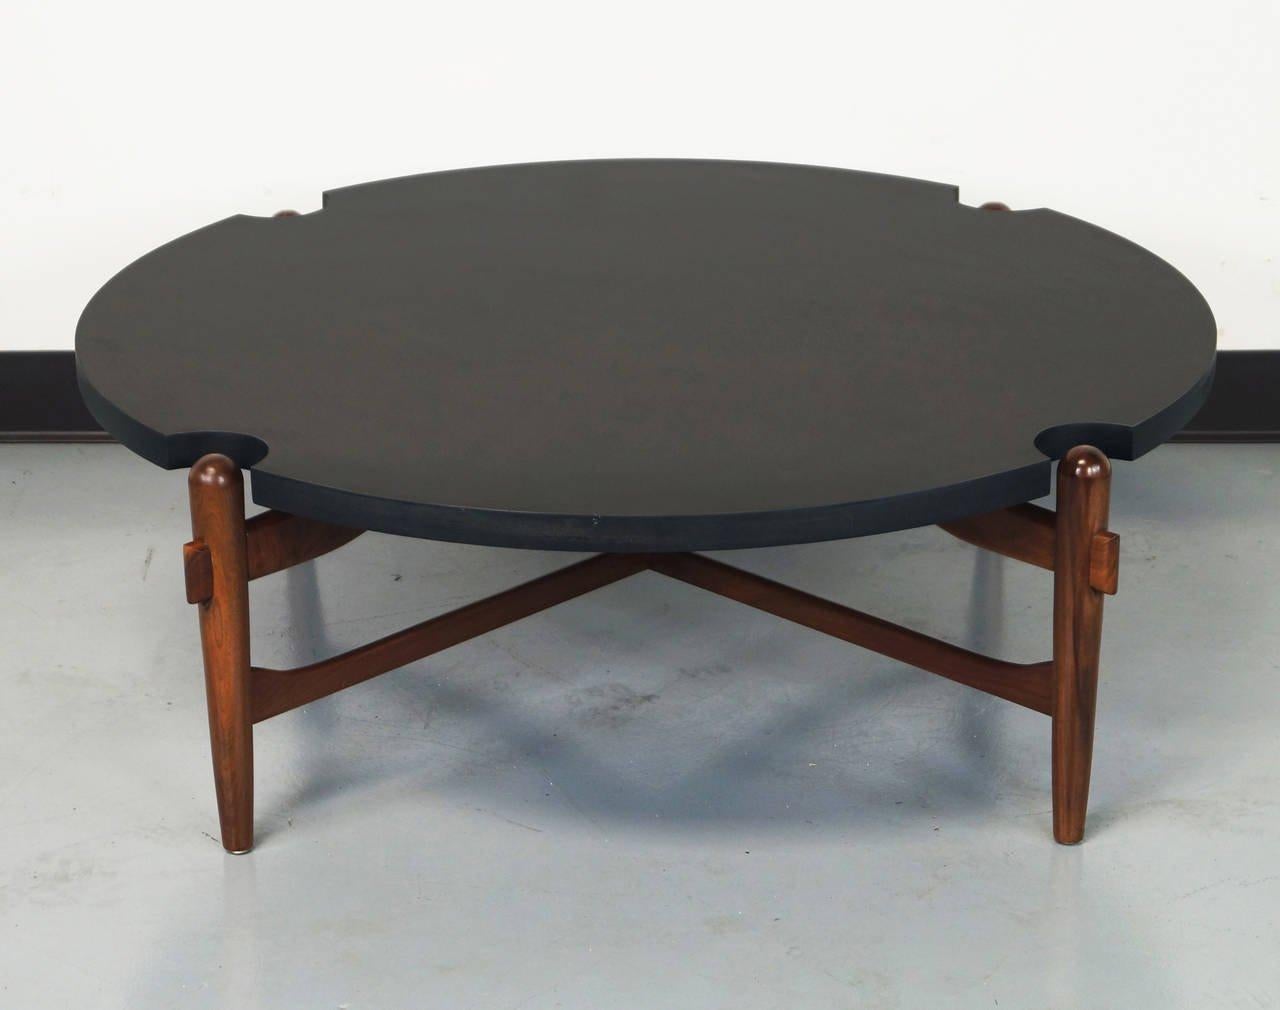 Midcentury cocktail/coffee table designed by well known California modernist Greta Grossman, circa 1950, having a laminate circular top with demilune reserves exposing the walnut tapered legs conjoined with the thru Tenon double X-stretcher.